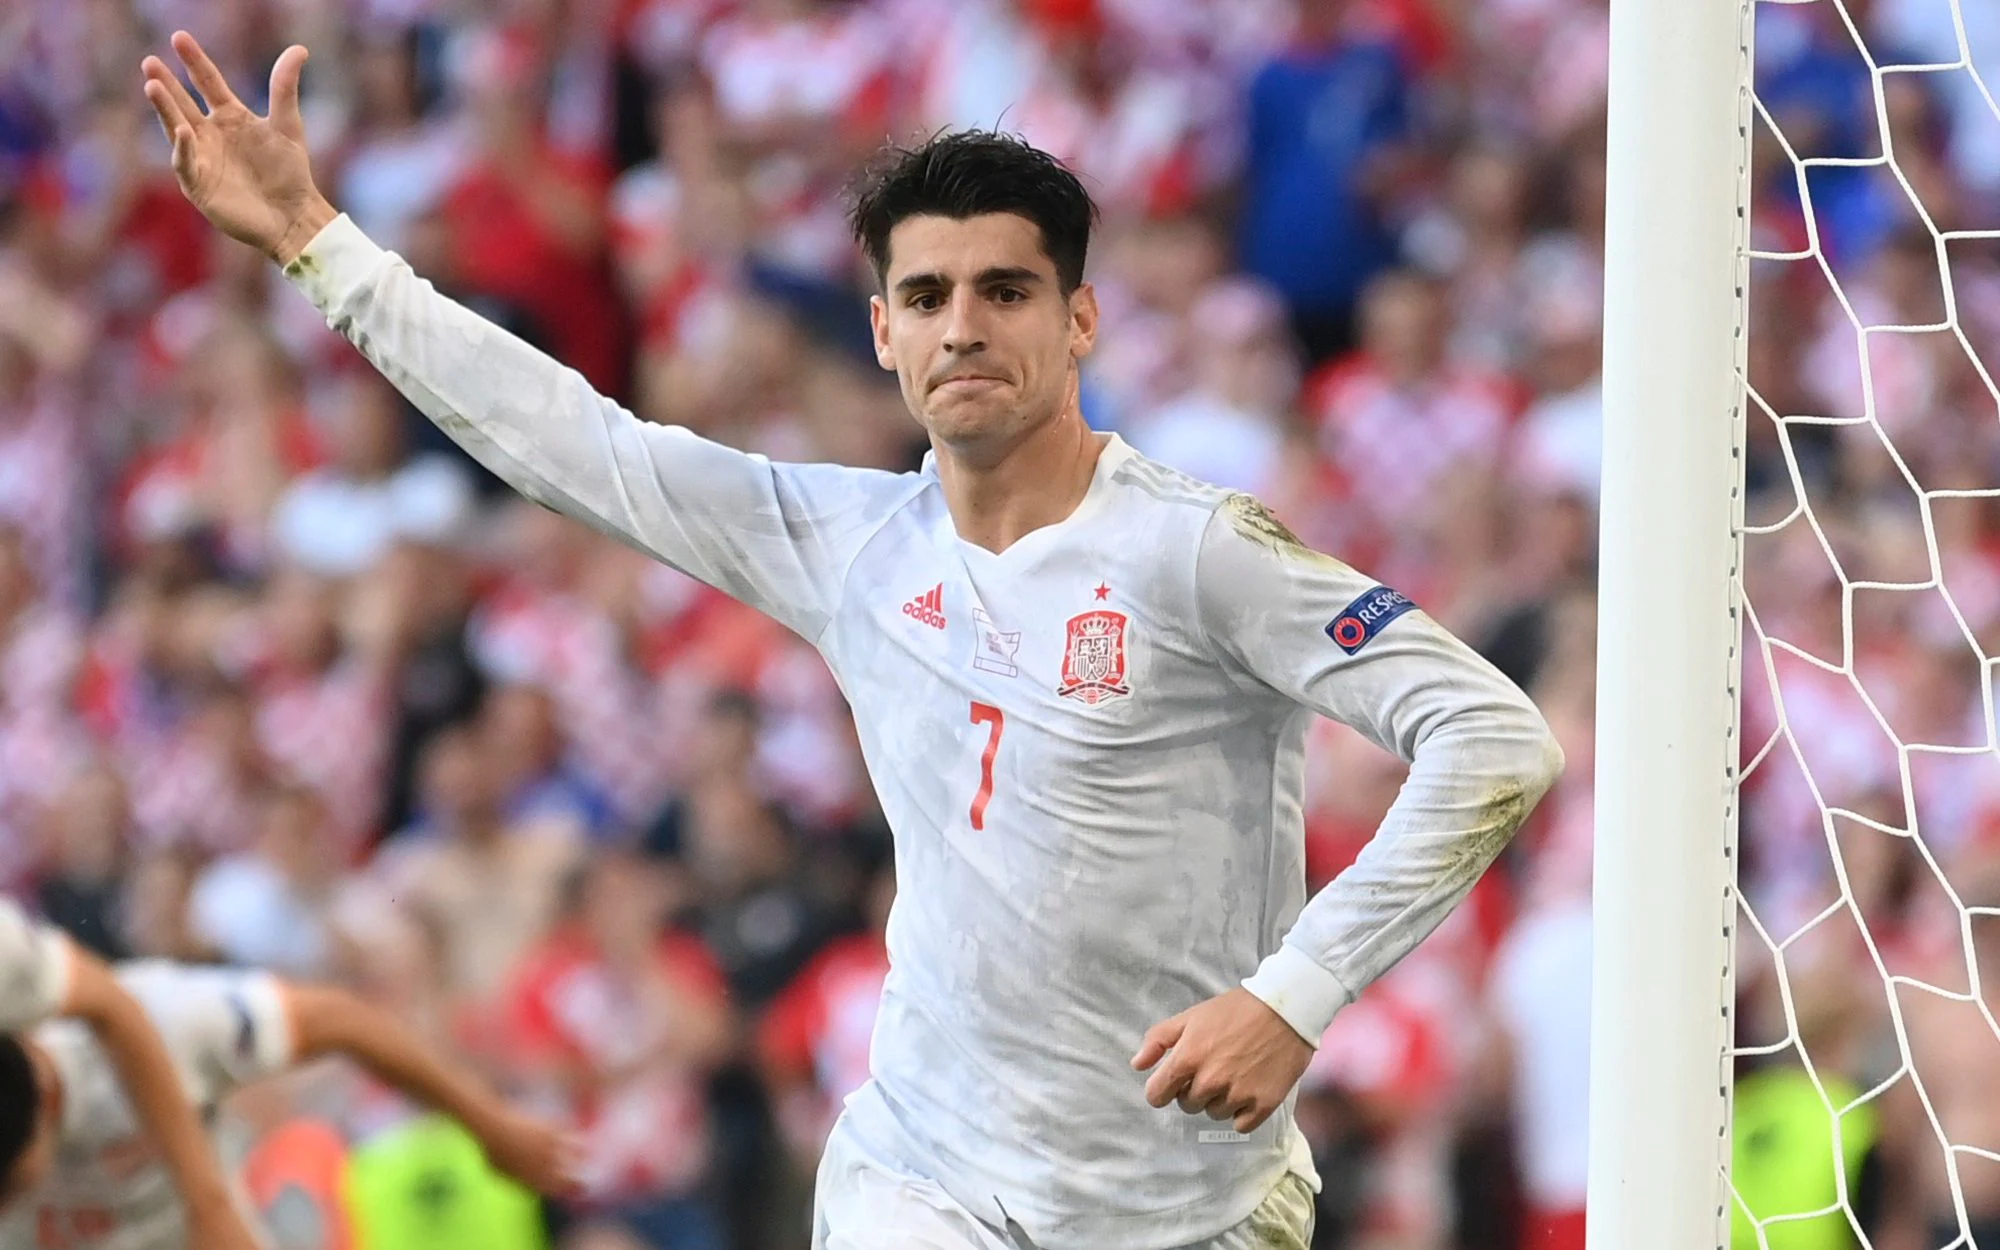 Spanish Morata is a top pick from Group E